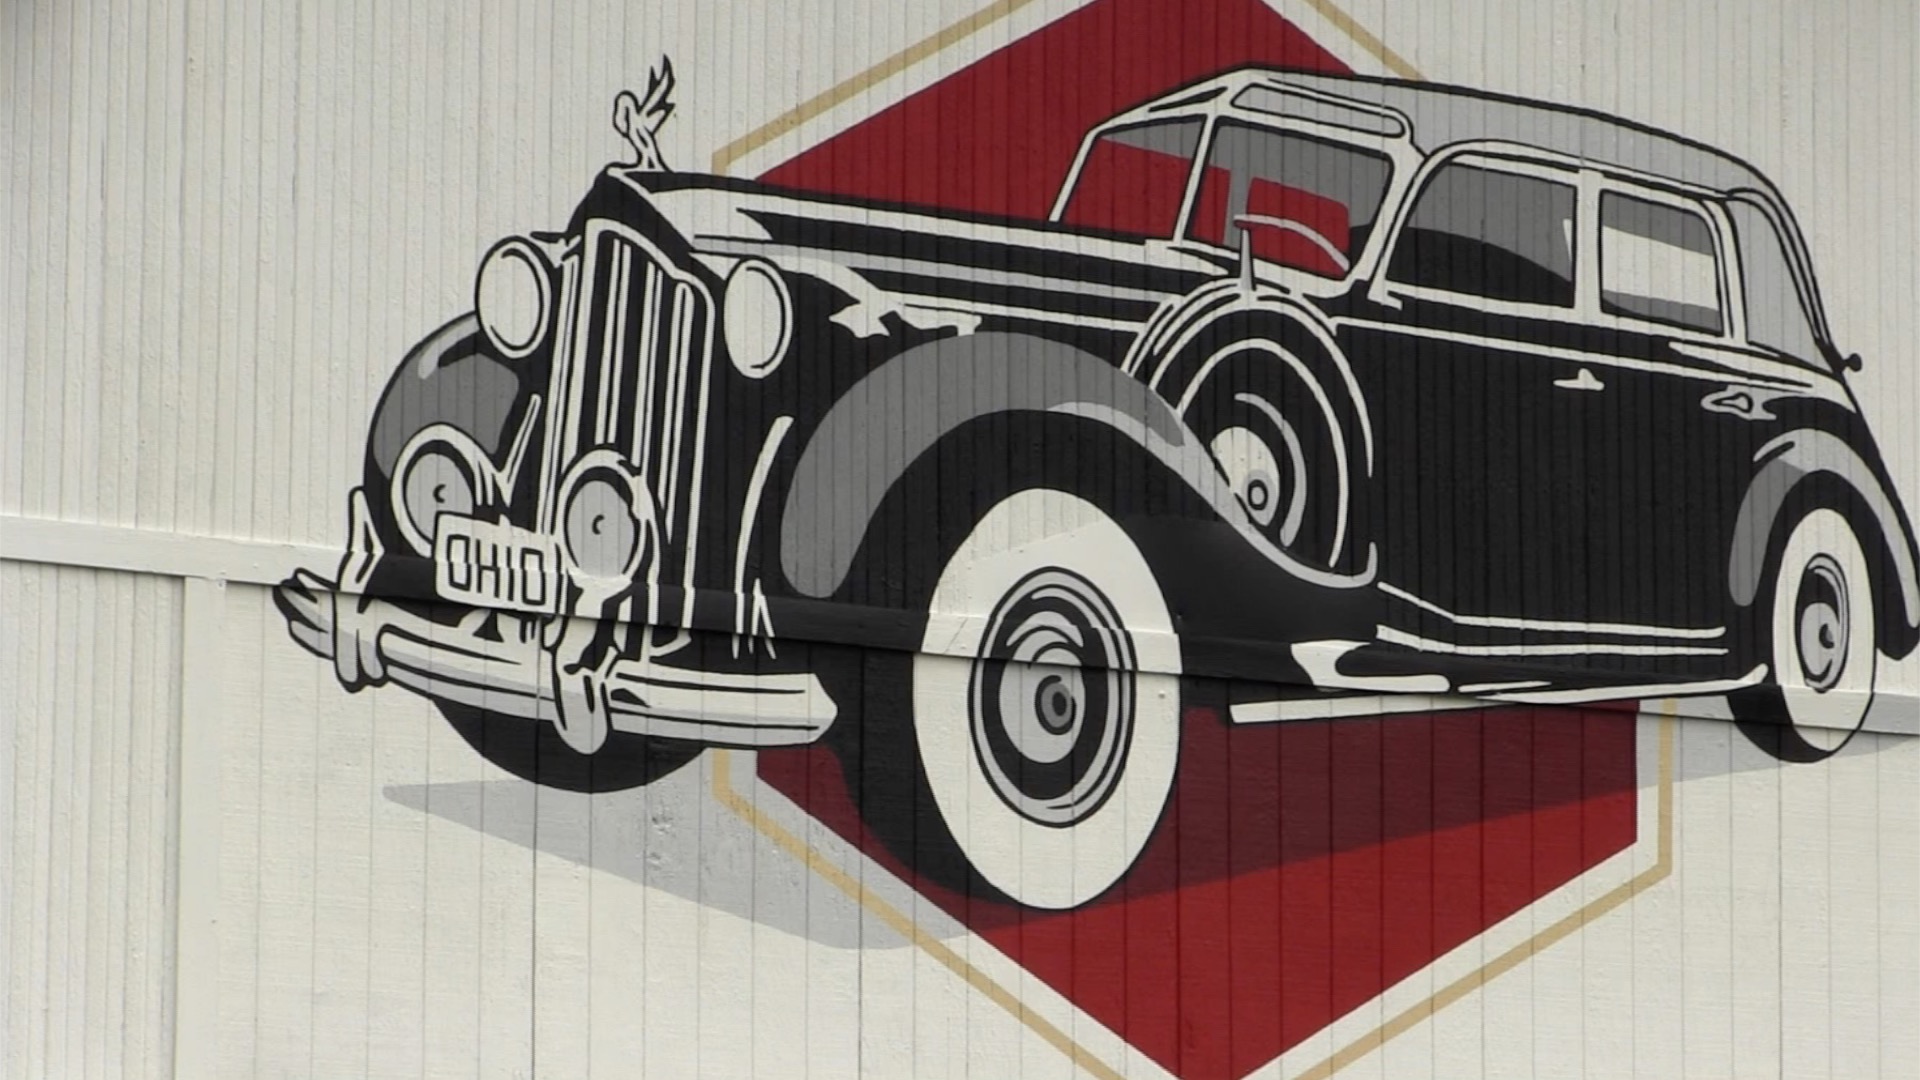 Packard Mural Is a Gateway to History